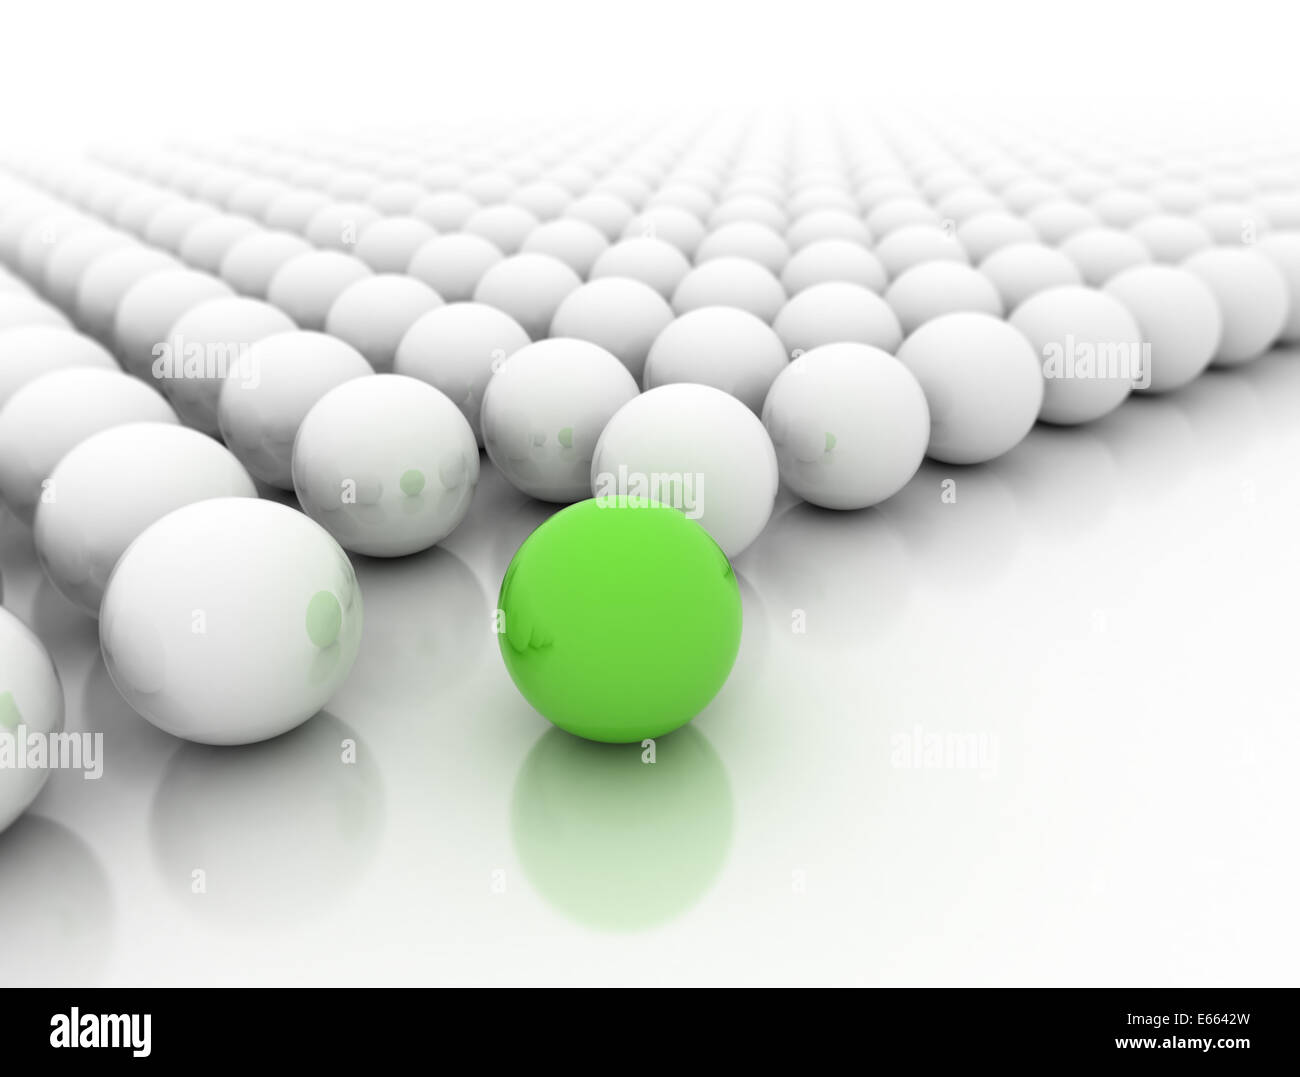 Green sphere standing out Stock Photo